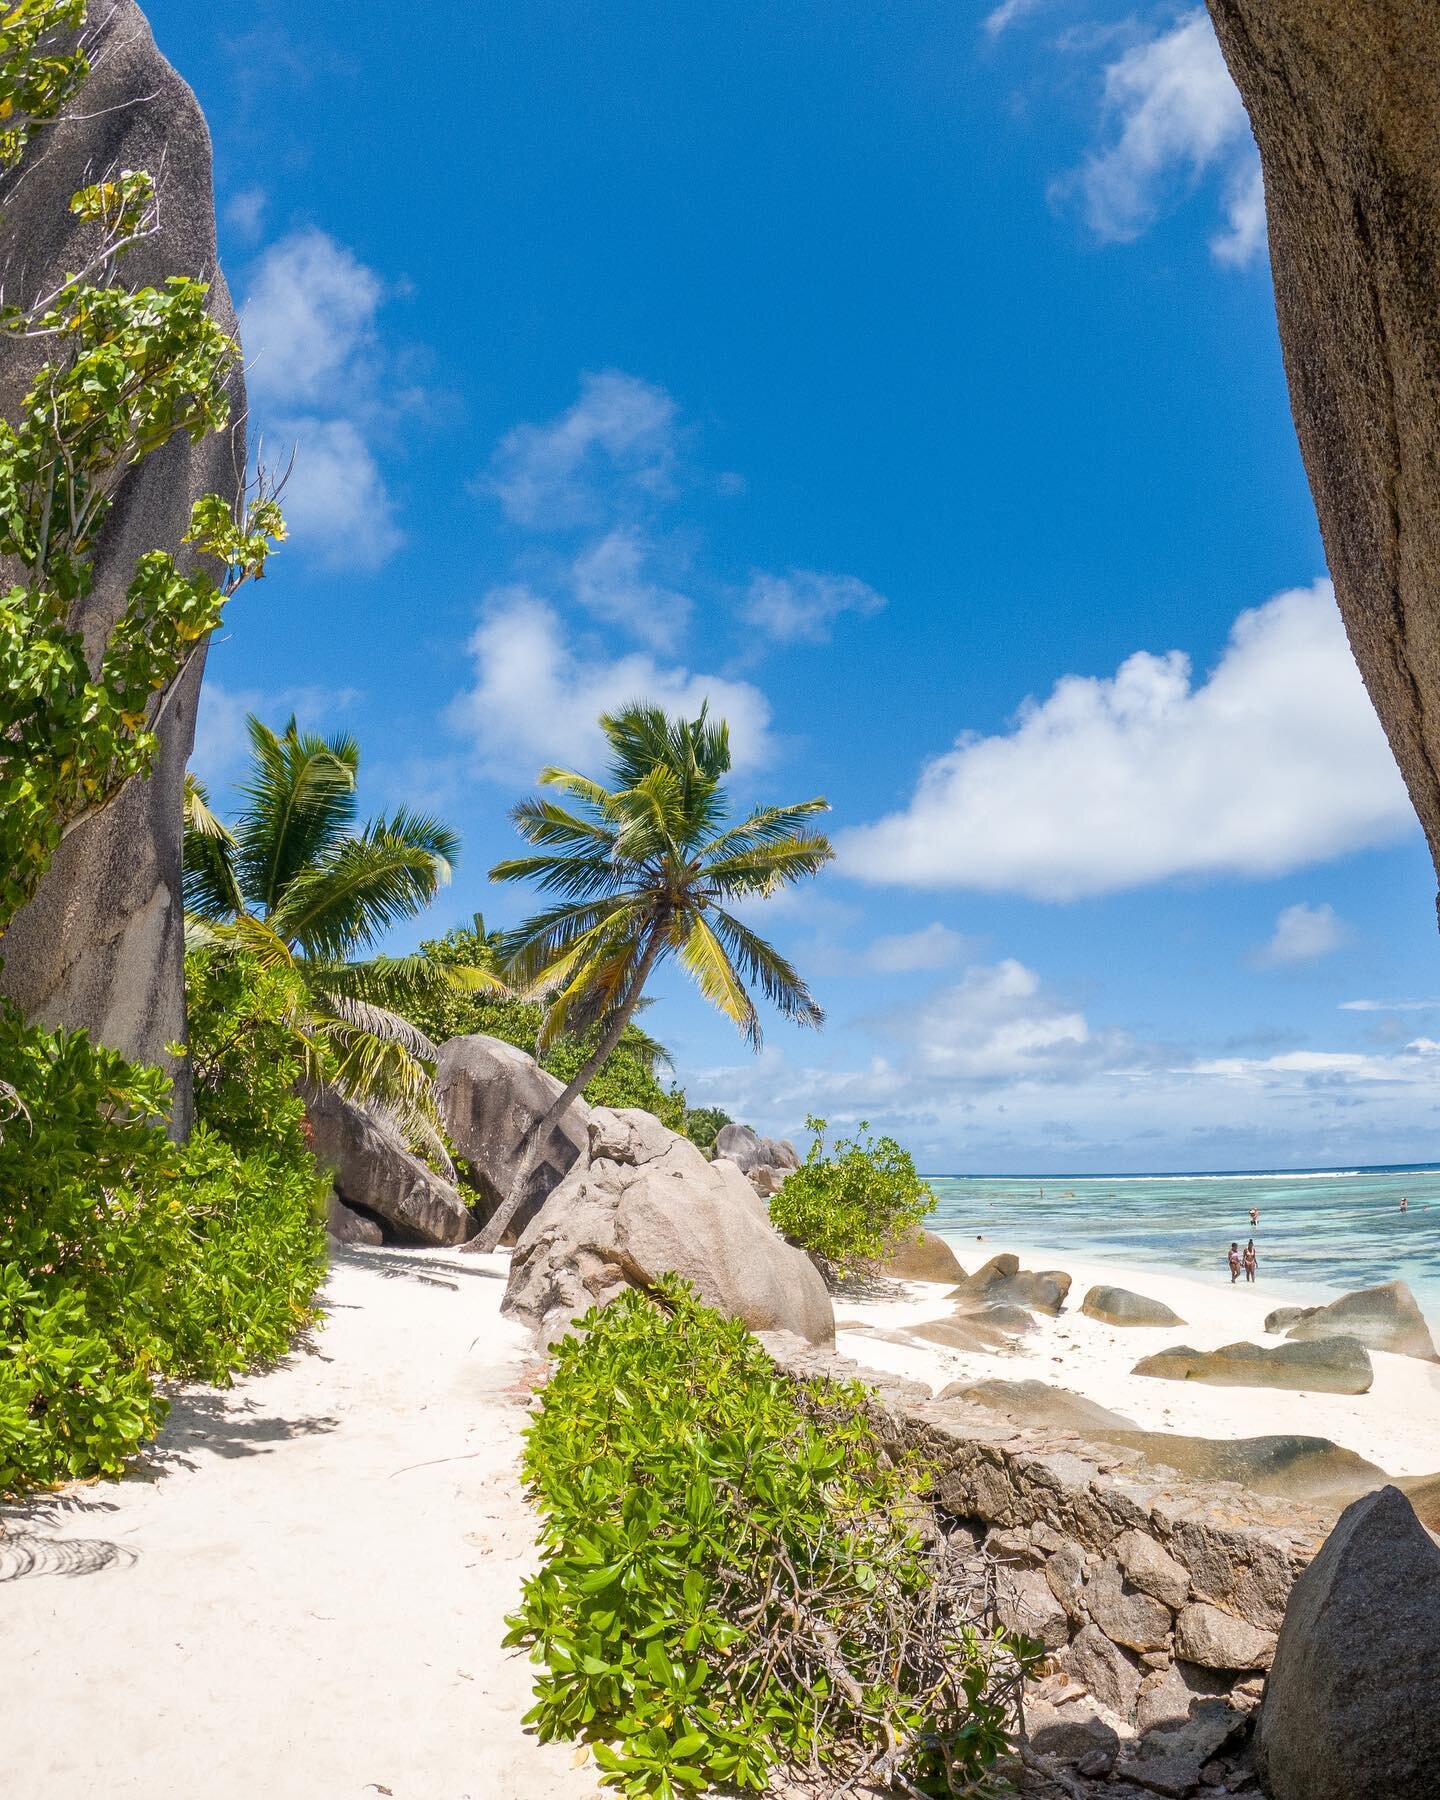 Almost certainly the first person ever to take this photo and post it to Instagram. The scenery in Seychelles makes it way too easy.
-
#SeeSeychelles @visitseychelles @bigambitionsza #seychelles #ladigue #ladigueisland #beach #palmtree